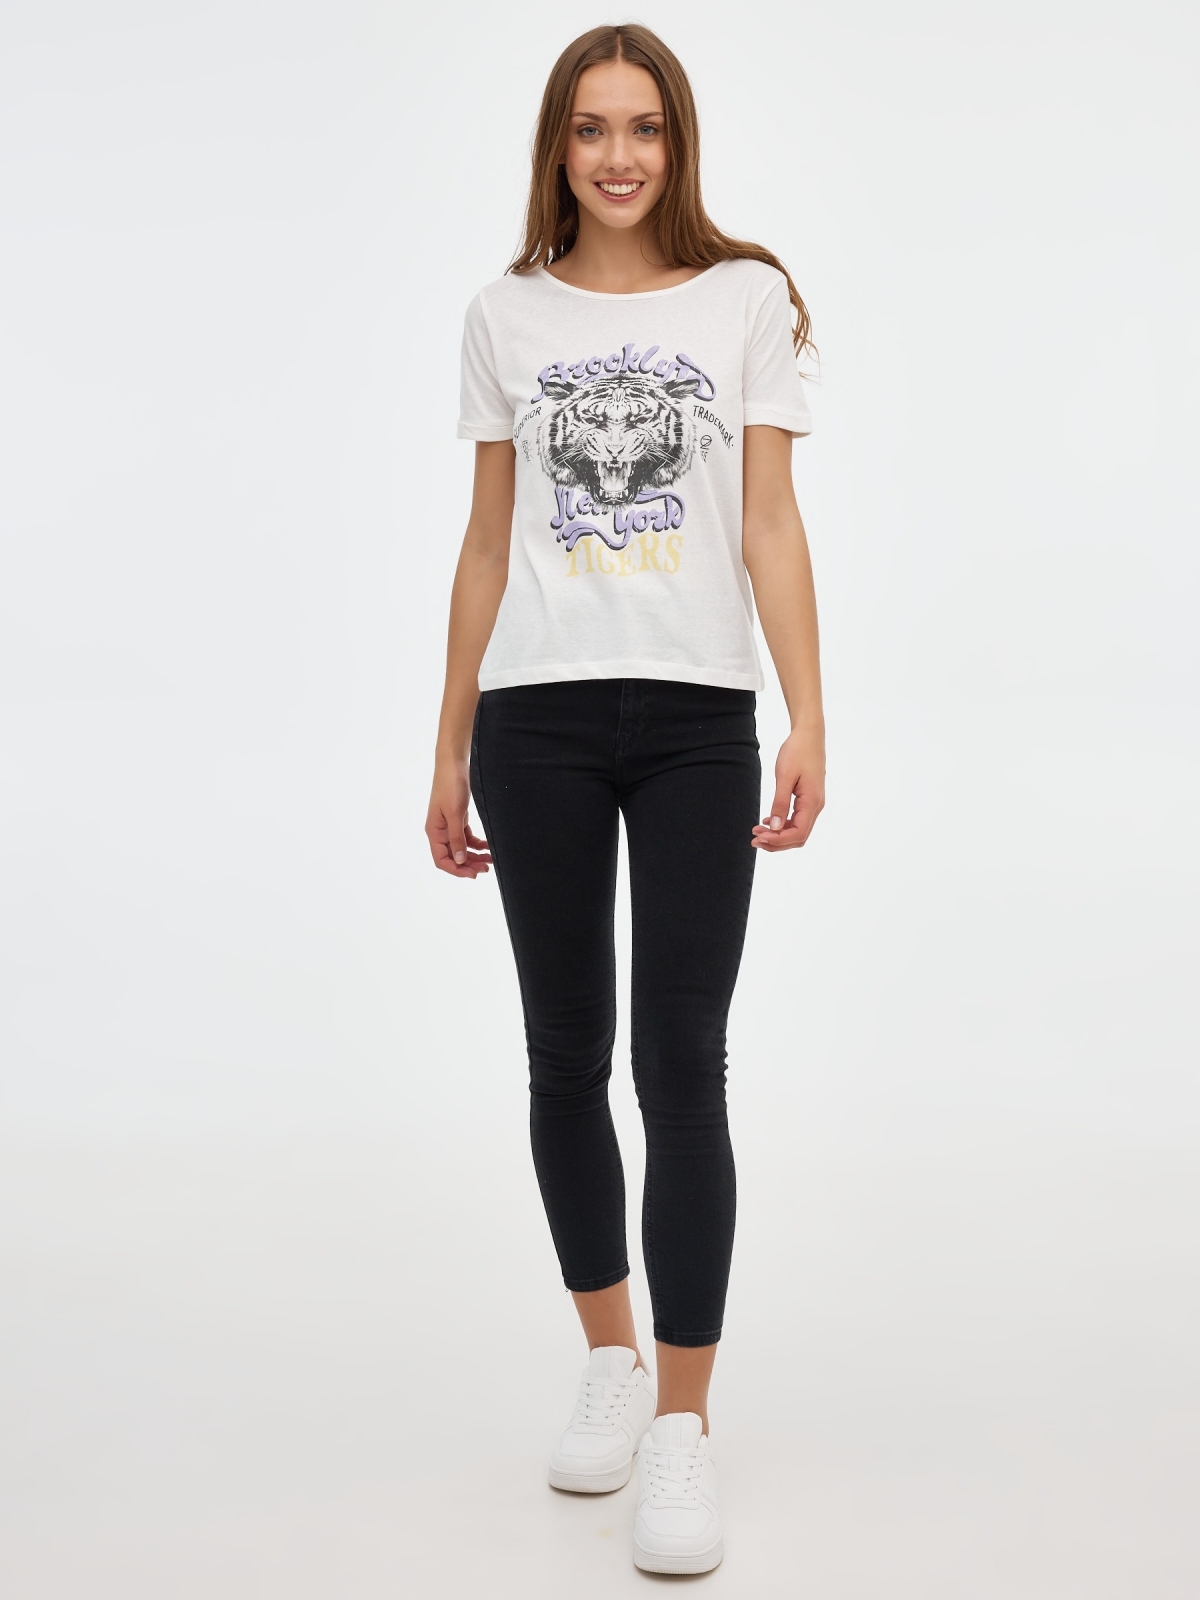 T-shirt gráfica Tigres off white vista geral frontal